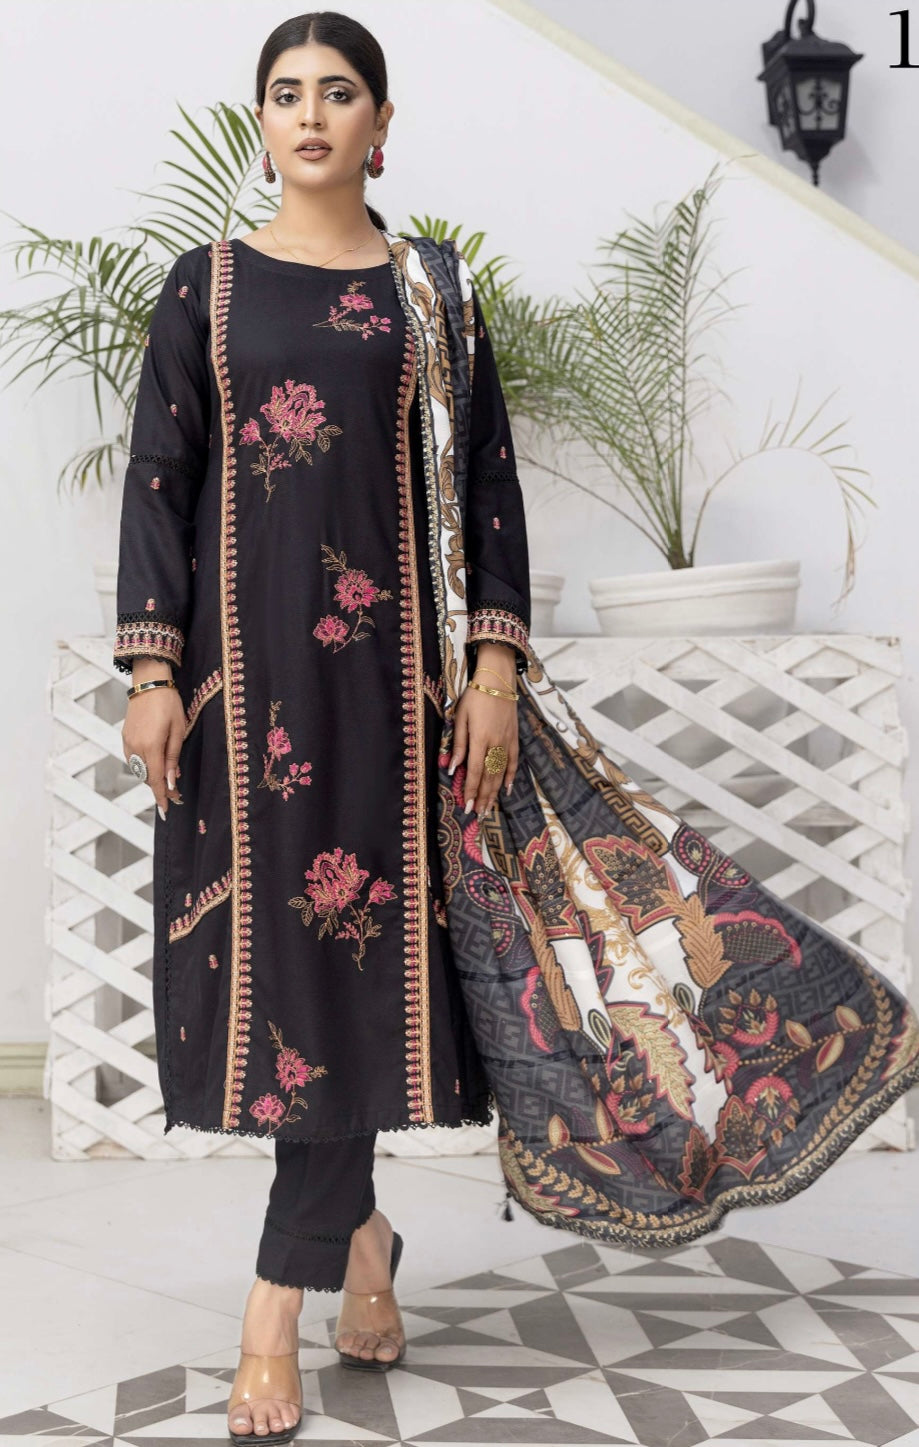 SIMRANS MAHI Dhanak Embroidered 3 Piece Winter Outfit With Shawl MSH01